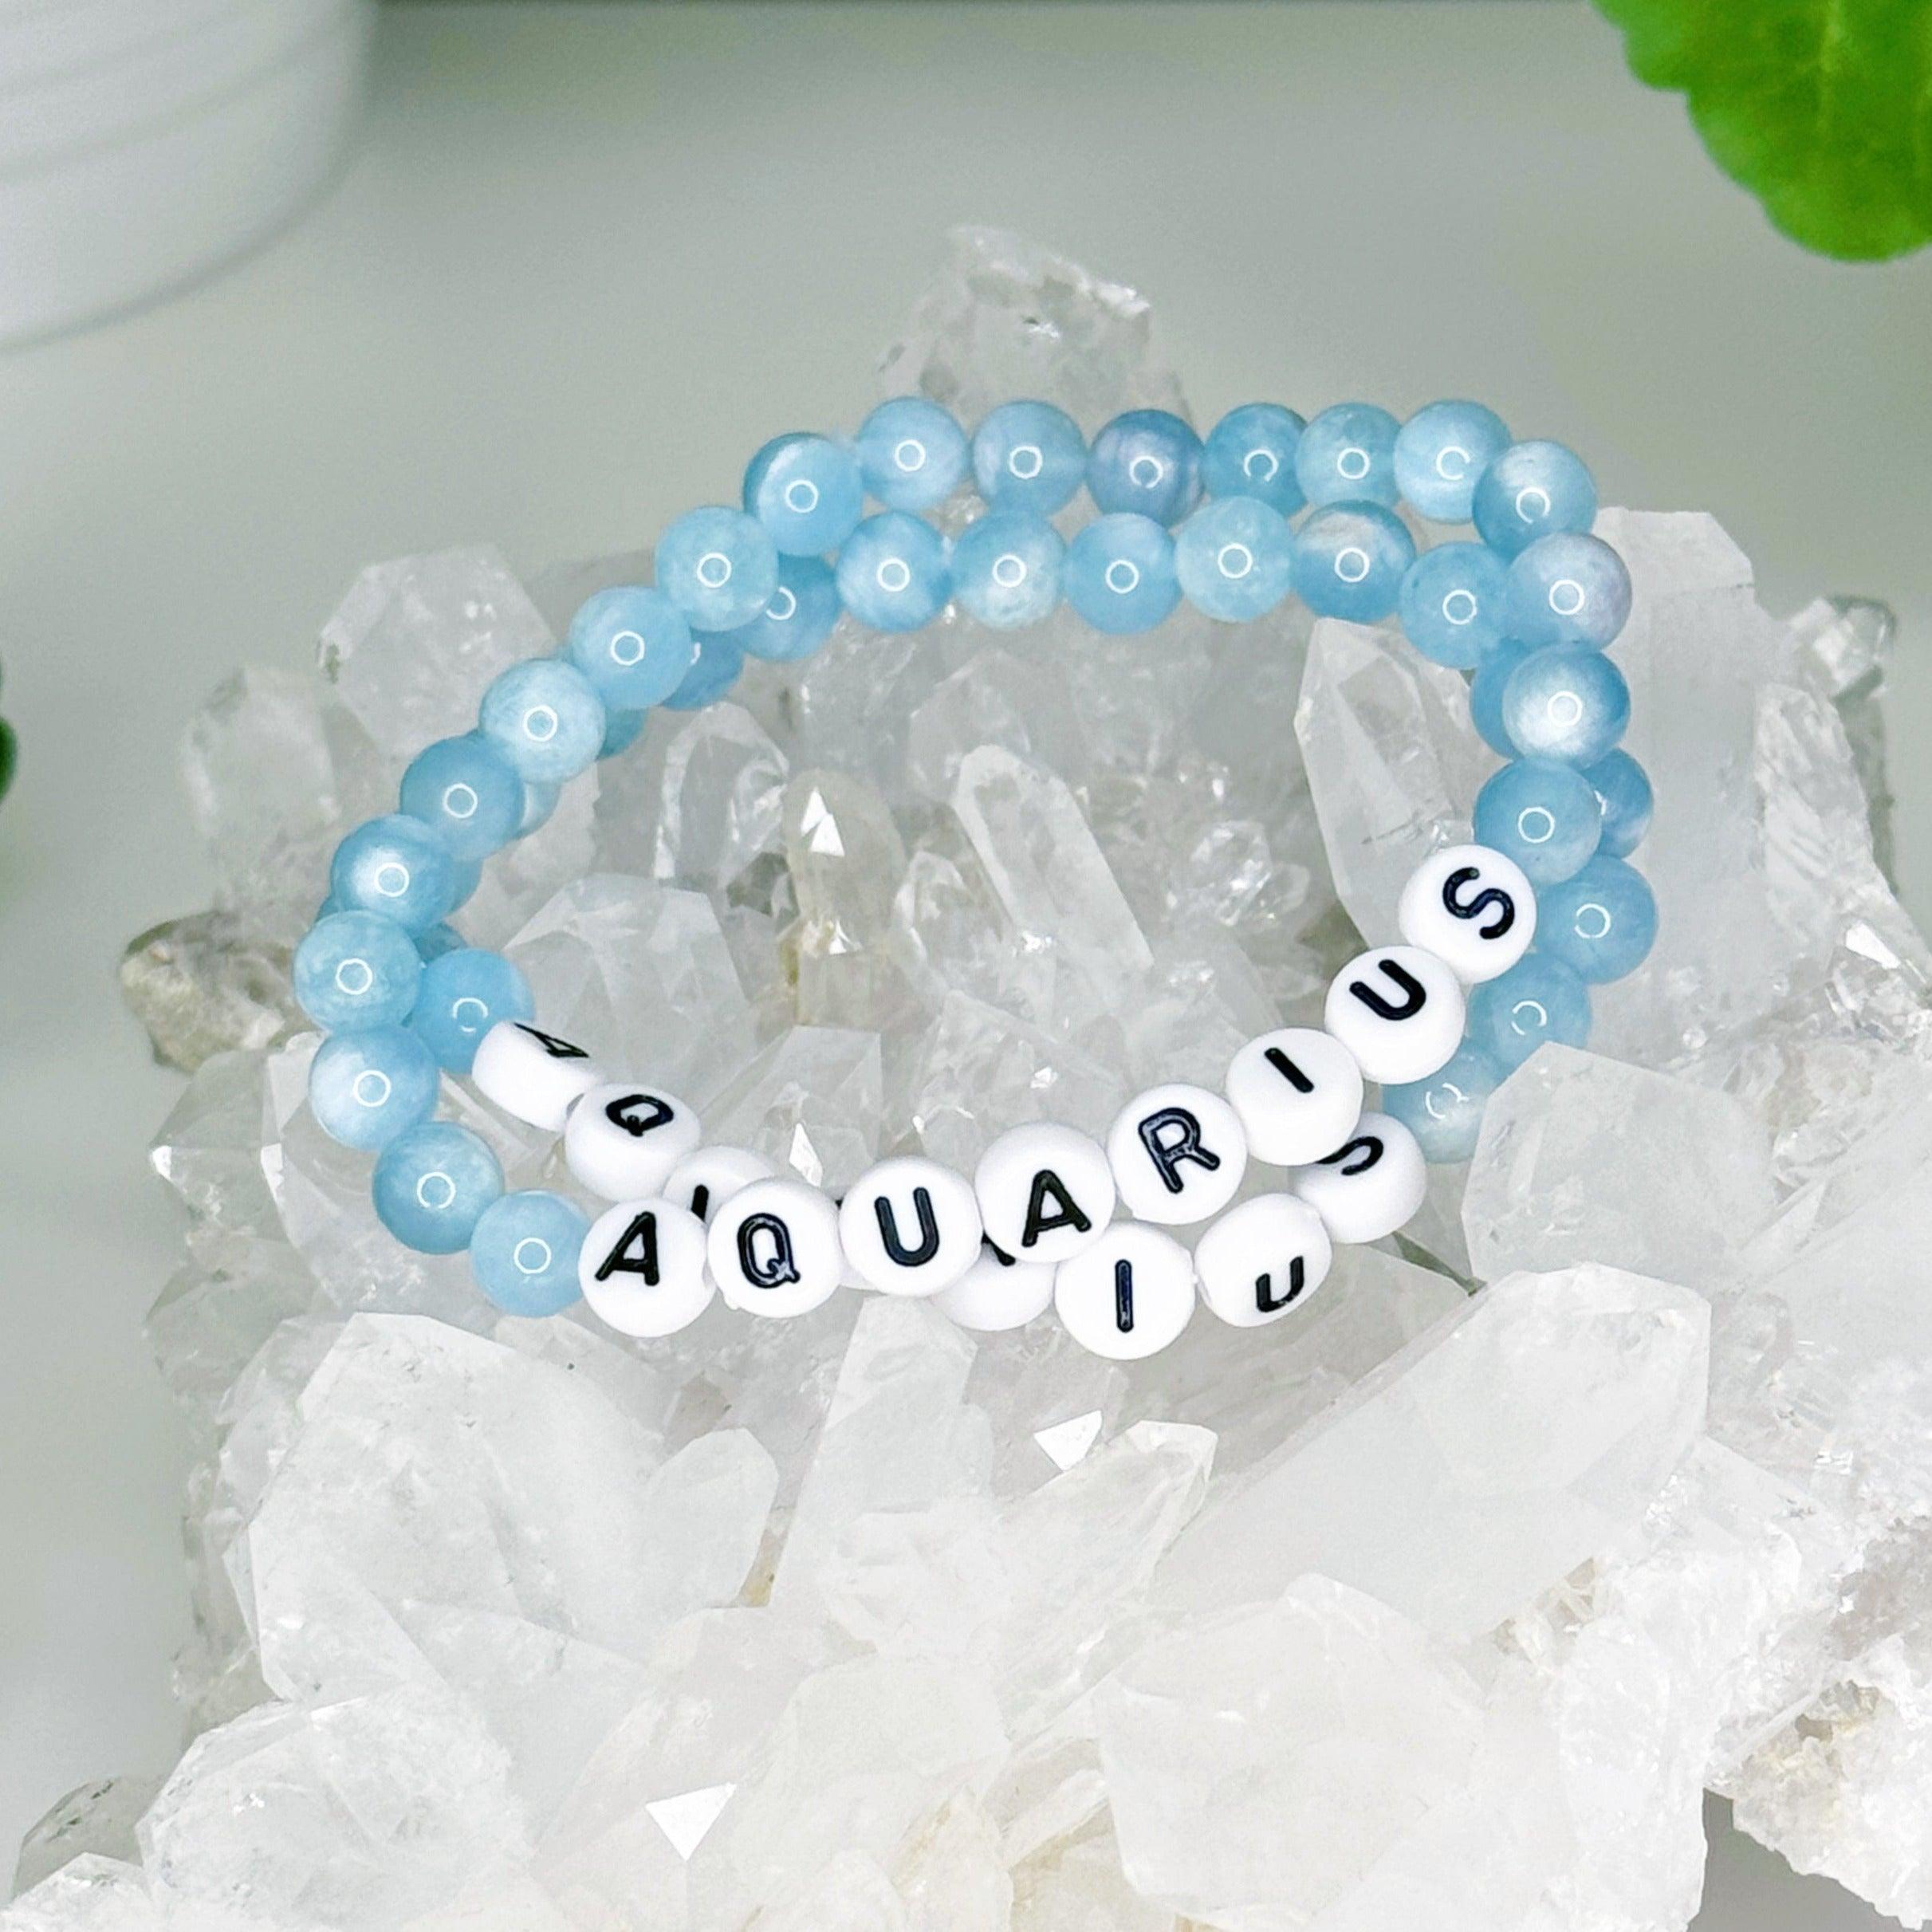 &#39;AQUARIUS&#39; AQUAMARINE 6mm - HANDMADE CRYSTAL BRACELET - 6mm, aquamarine, aquarius, aquarius stack, astro collection, blue, bracelet, crystal bracelet, handmade bracelet, jewelry, recently added, water, Wearable - The Mineral Maven